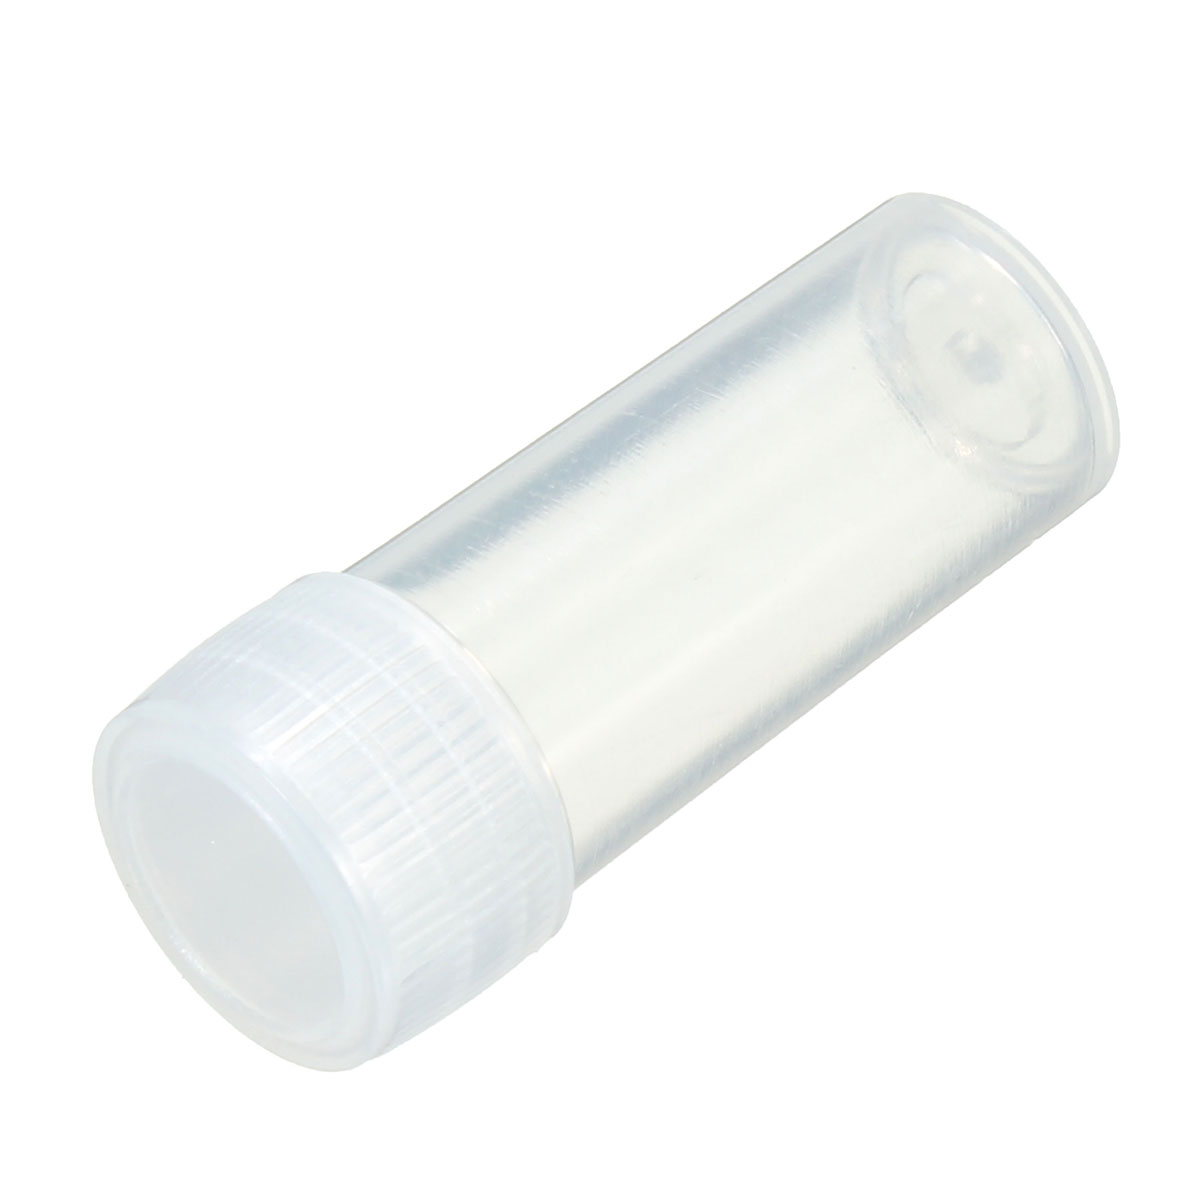 20Pcs-5ml-Chemistry-Plastic-Test-Tube-Vials-with-Seal-Caps-Pack-Container-1300038-6